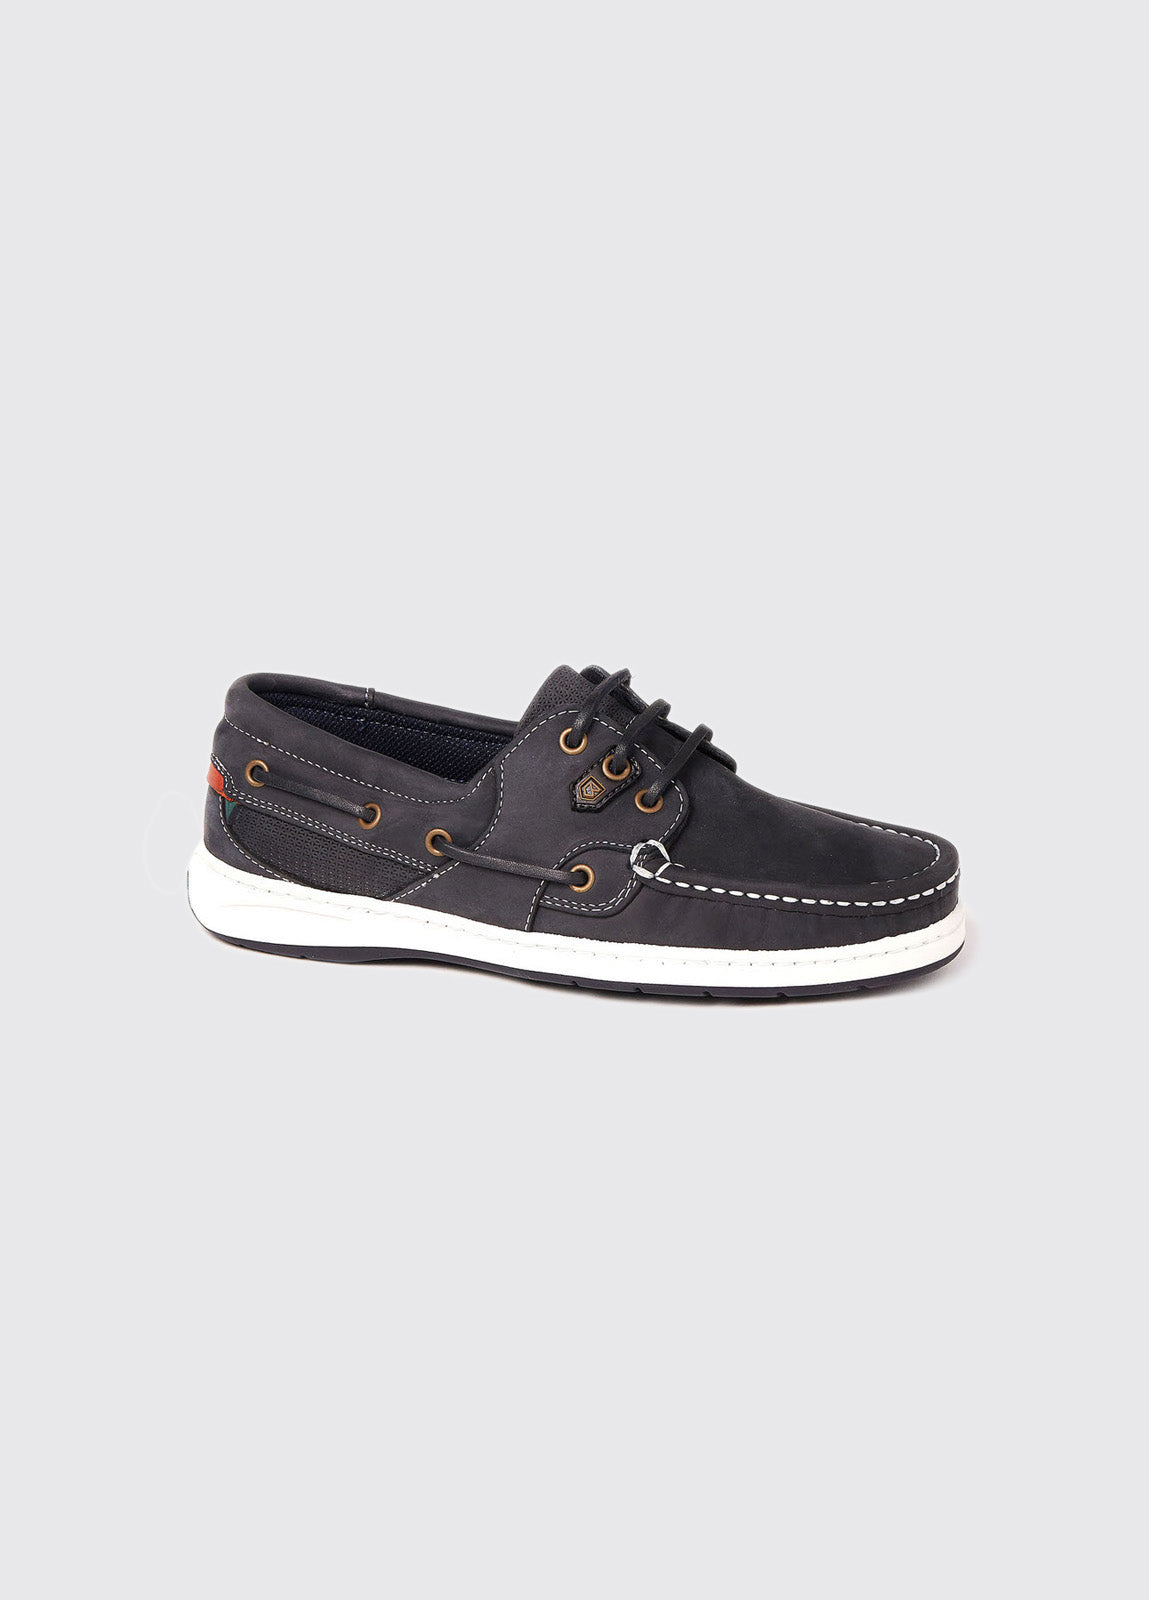 Auckland Loafer - Navy